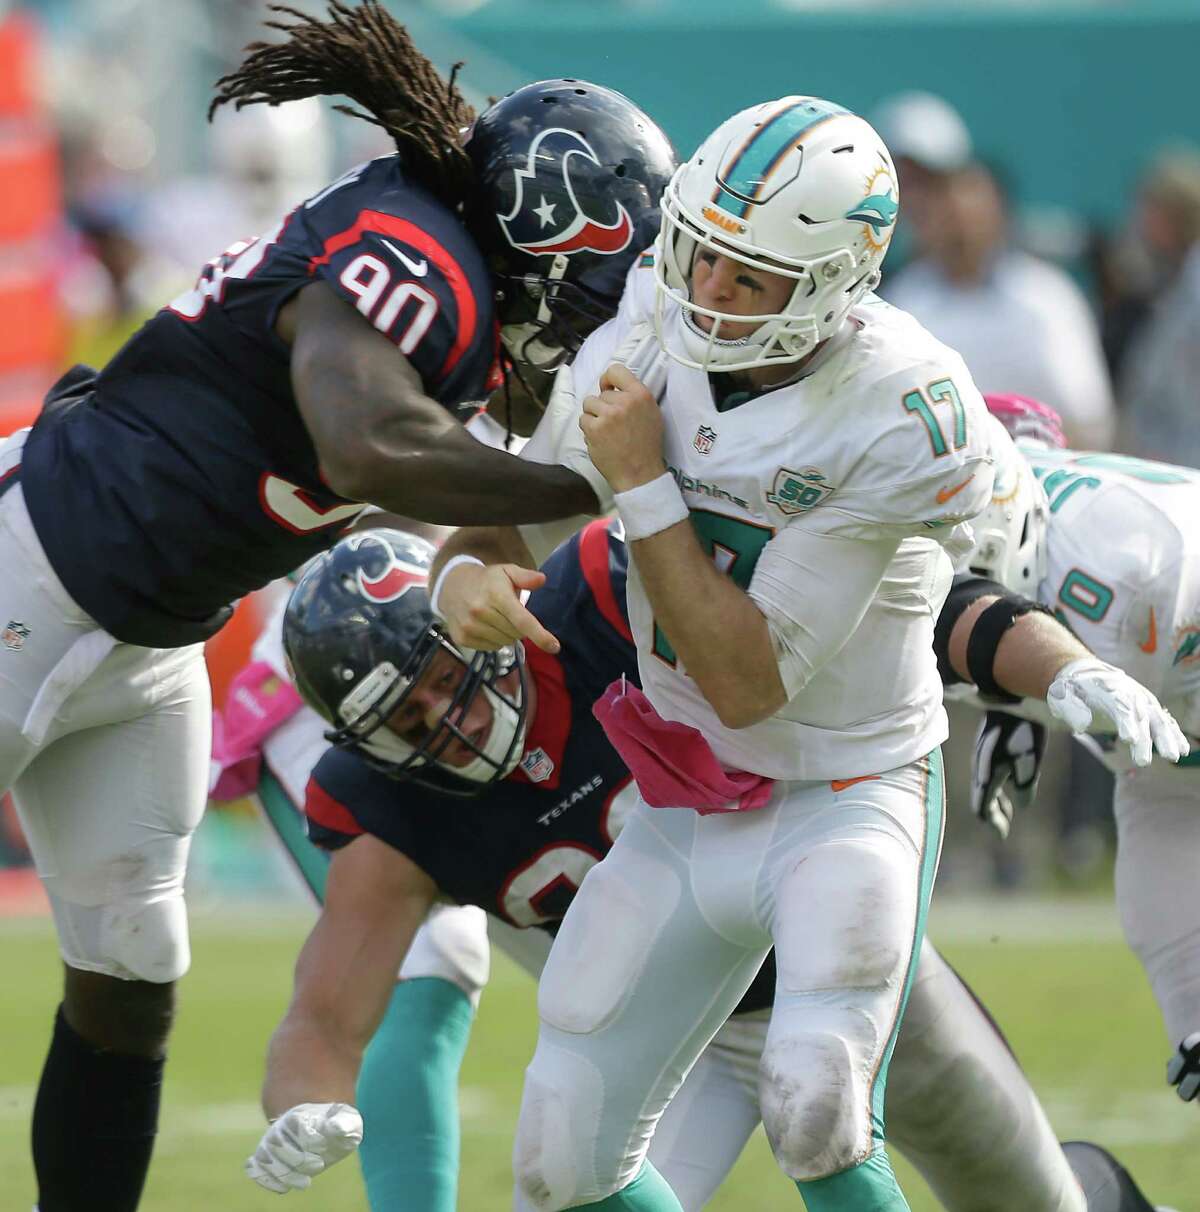 During a respite between numerous injuries that have sidelined him for 13 of his first 24 NFL games, Texans linebacker Jadeveon Clowney, left, got his lone sack against Miami last month.